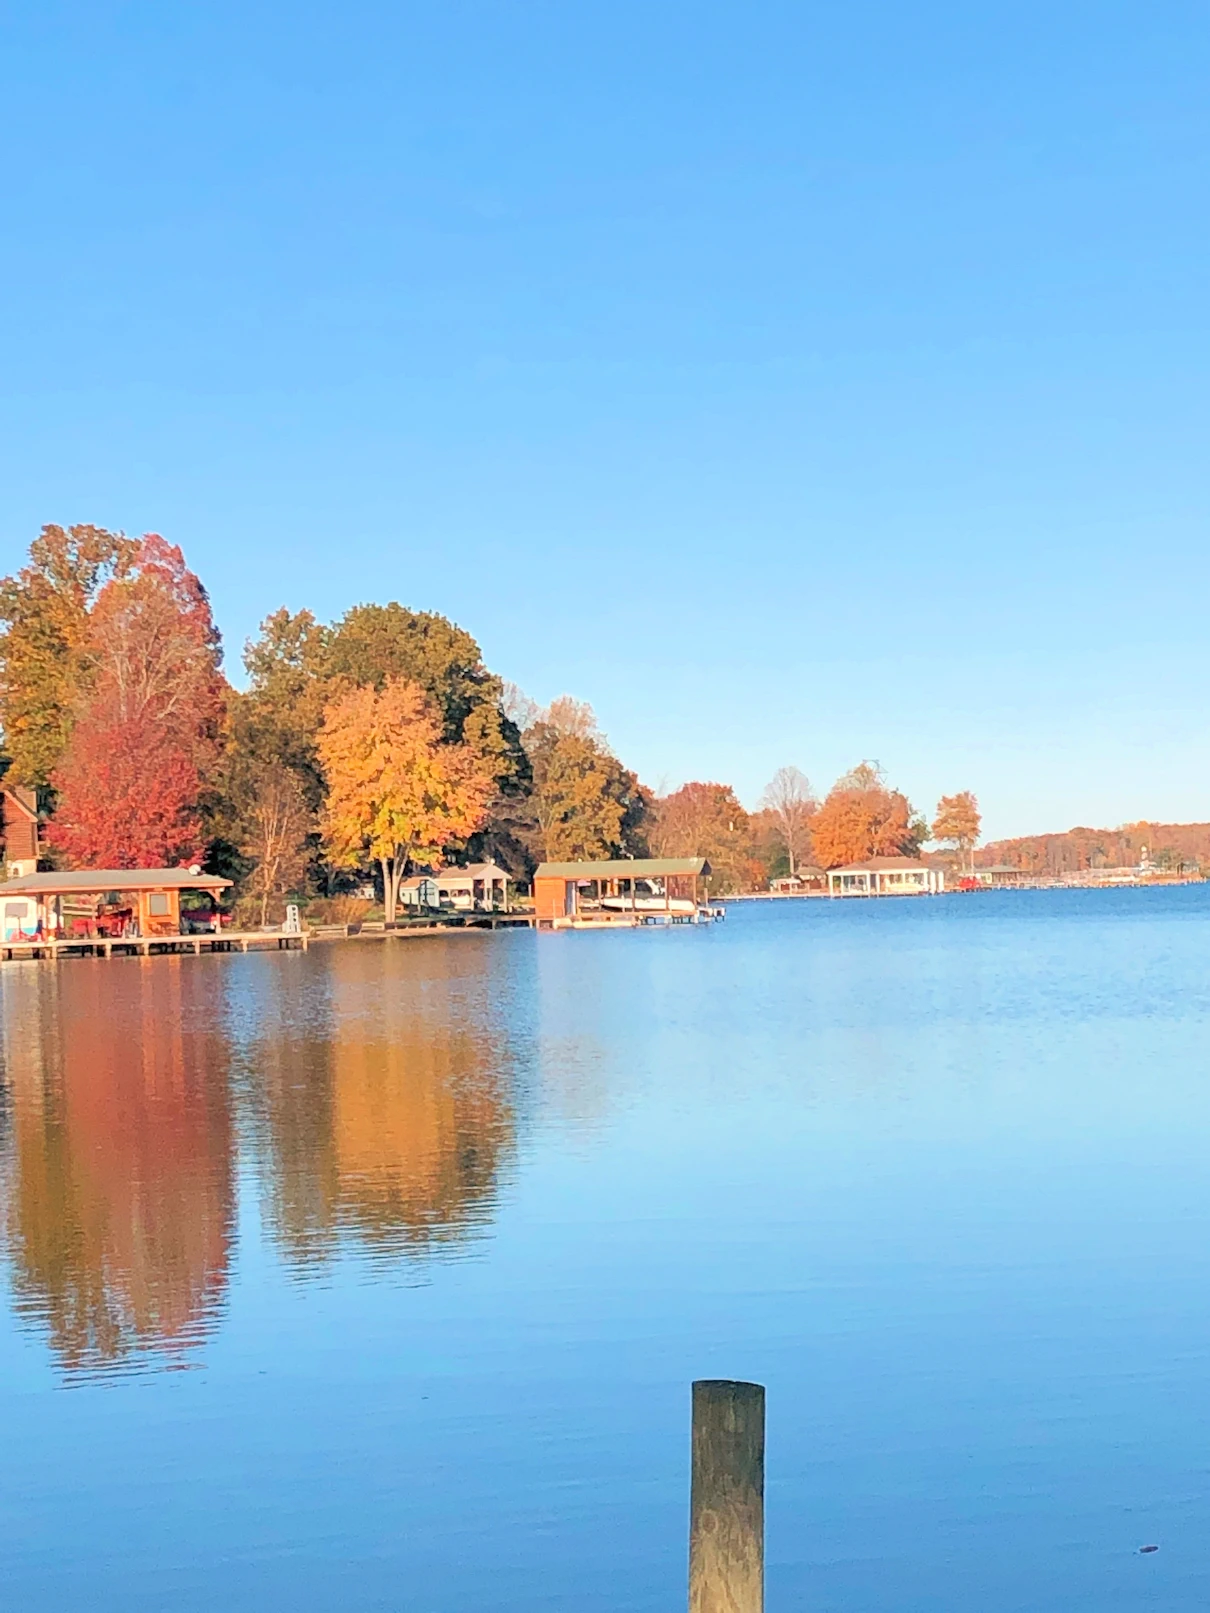 A Hidden Gem for Lakeside Retreats and Waterfront Bliss